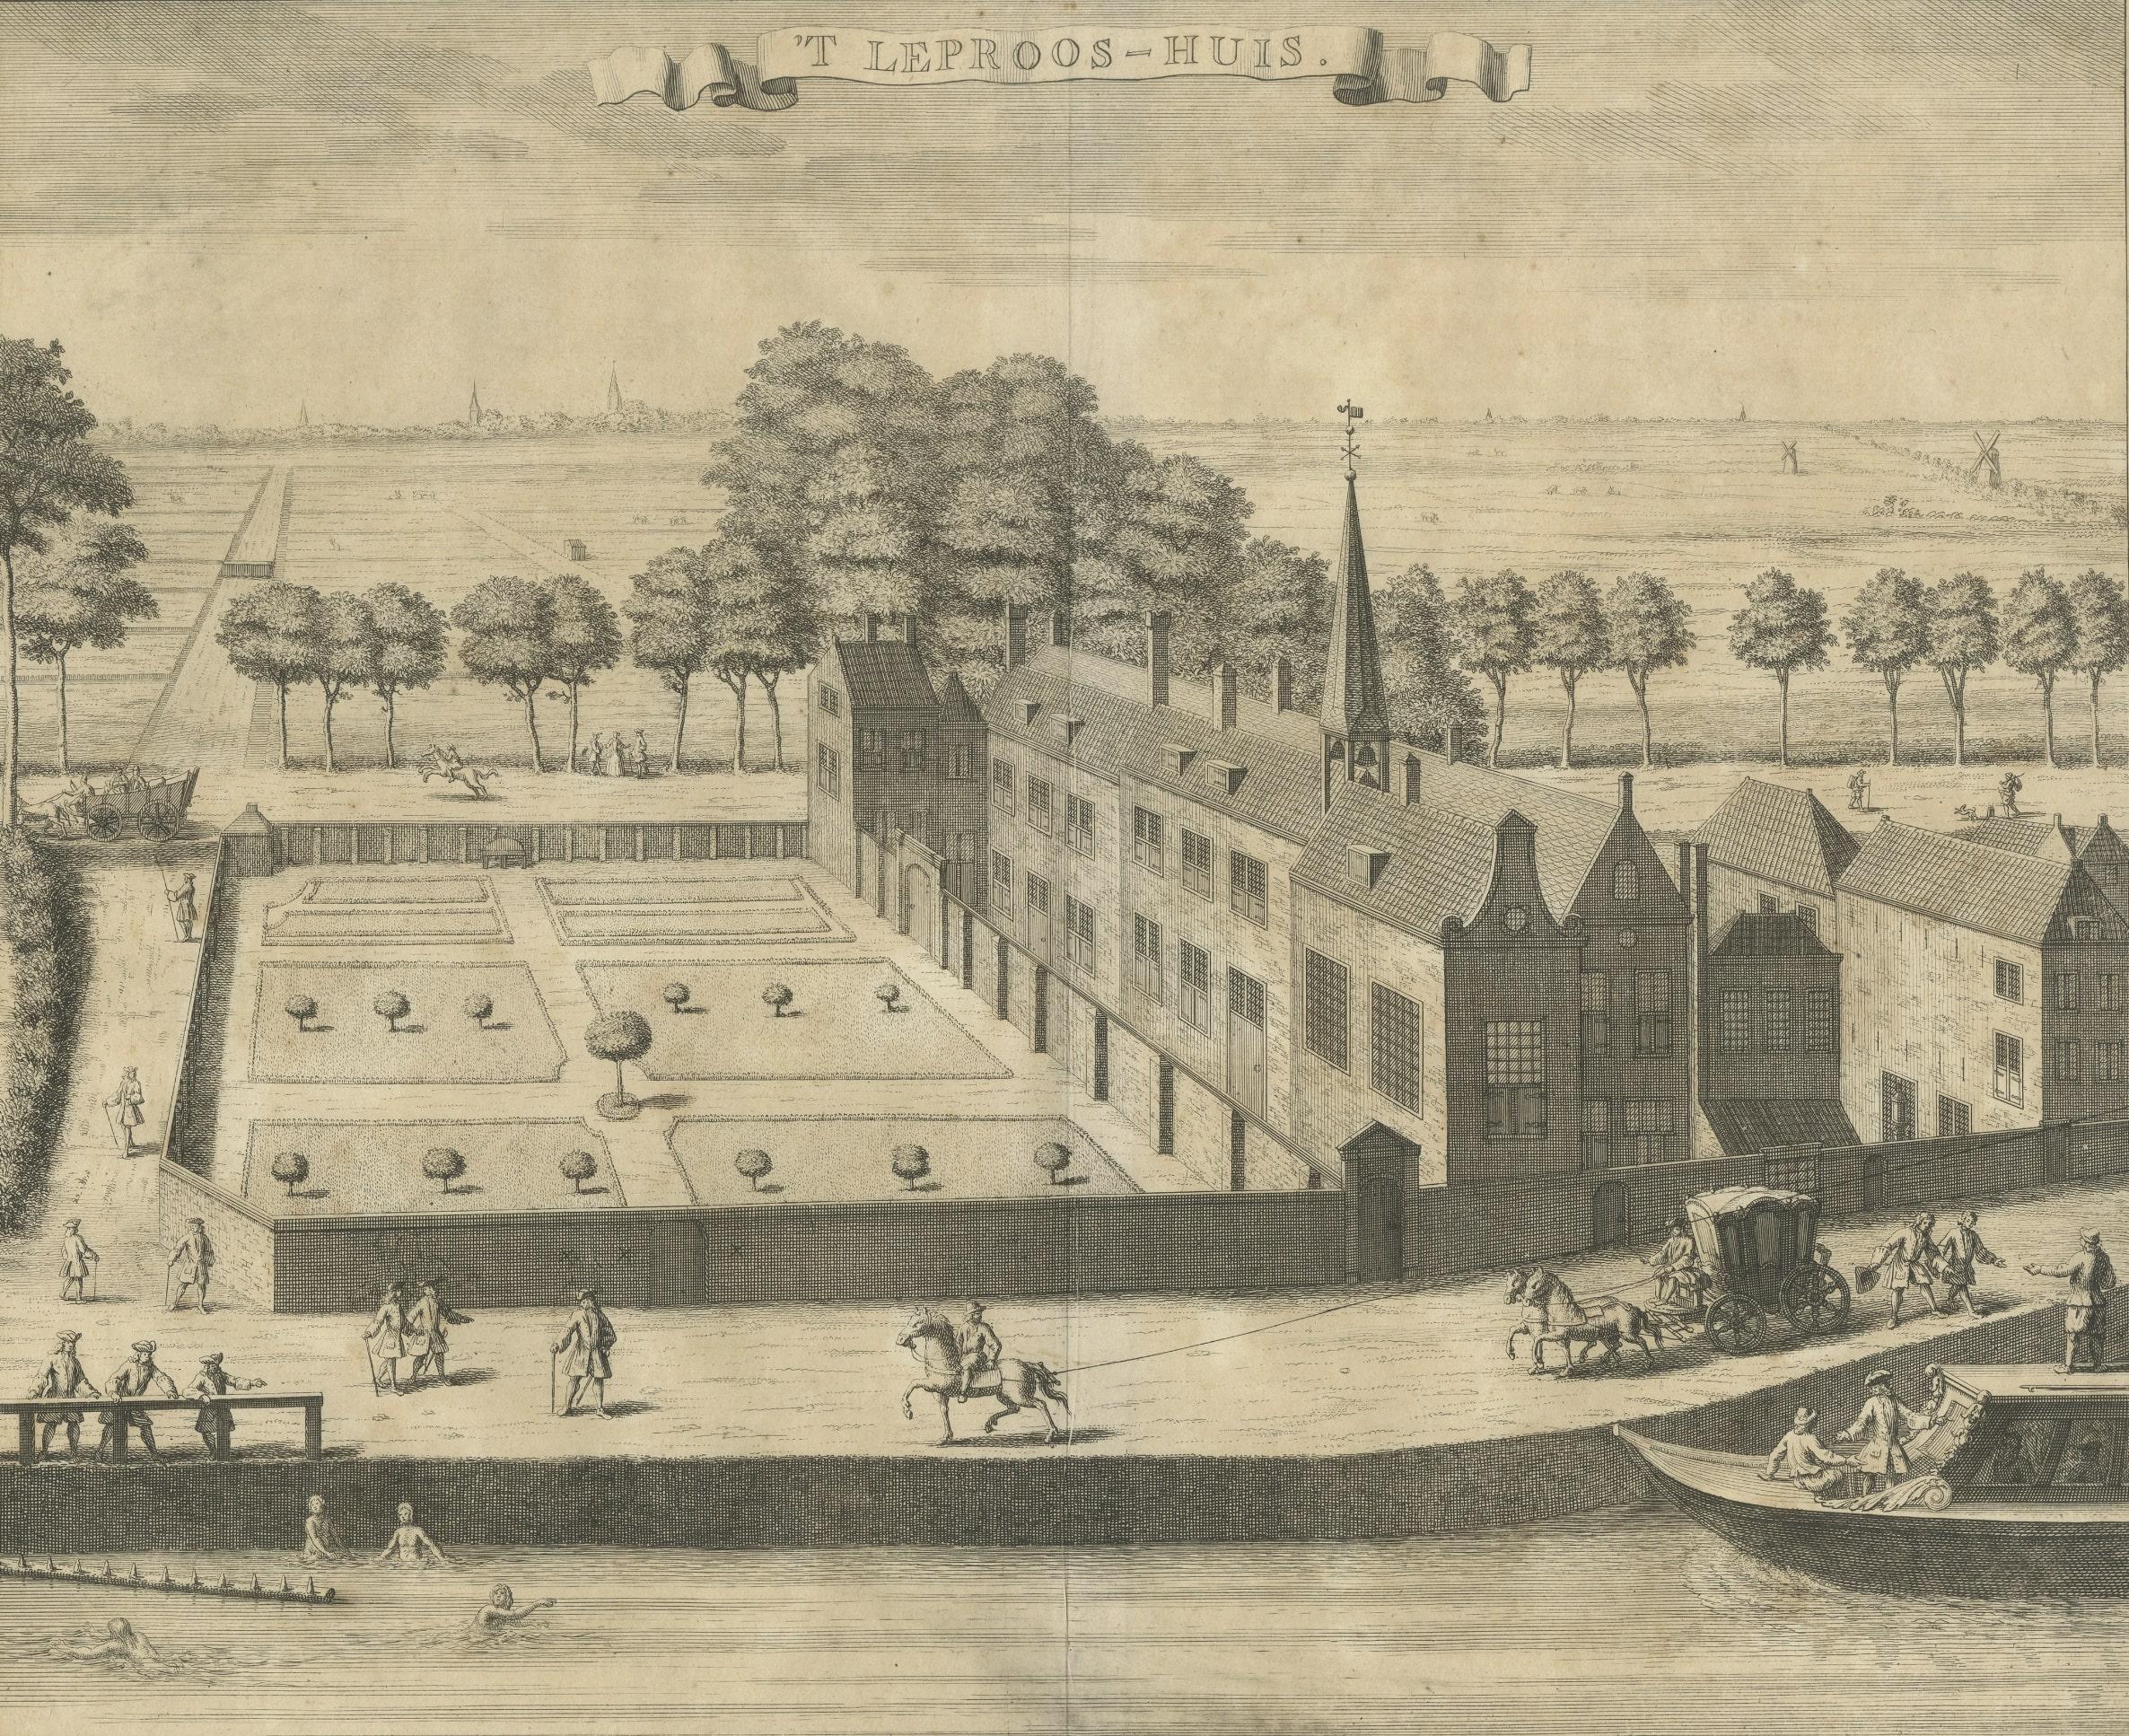 Antique print titled 'T Leproos-Huis'. View of the leper's house in The Hague. In the water, a barge, and a number of swimmers. On the roads various figures and carriages. Published by R. Boitet, circa 1735.